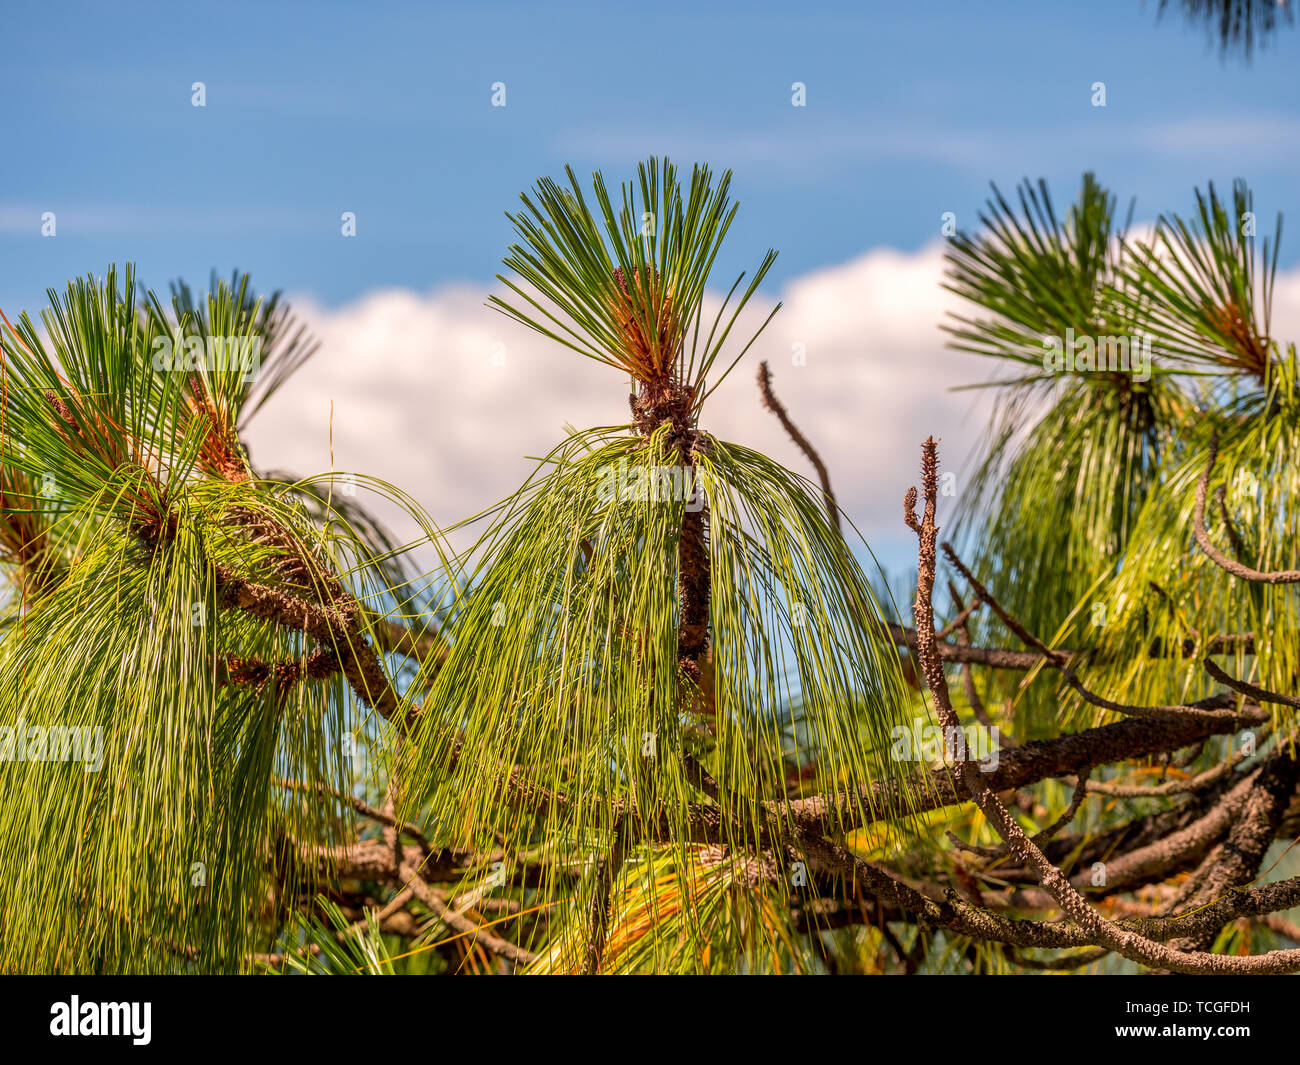 Close up image of a pine tree during day time Stock Photo